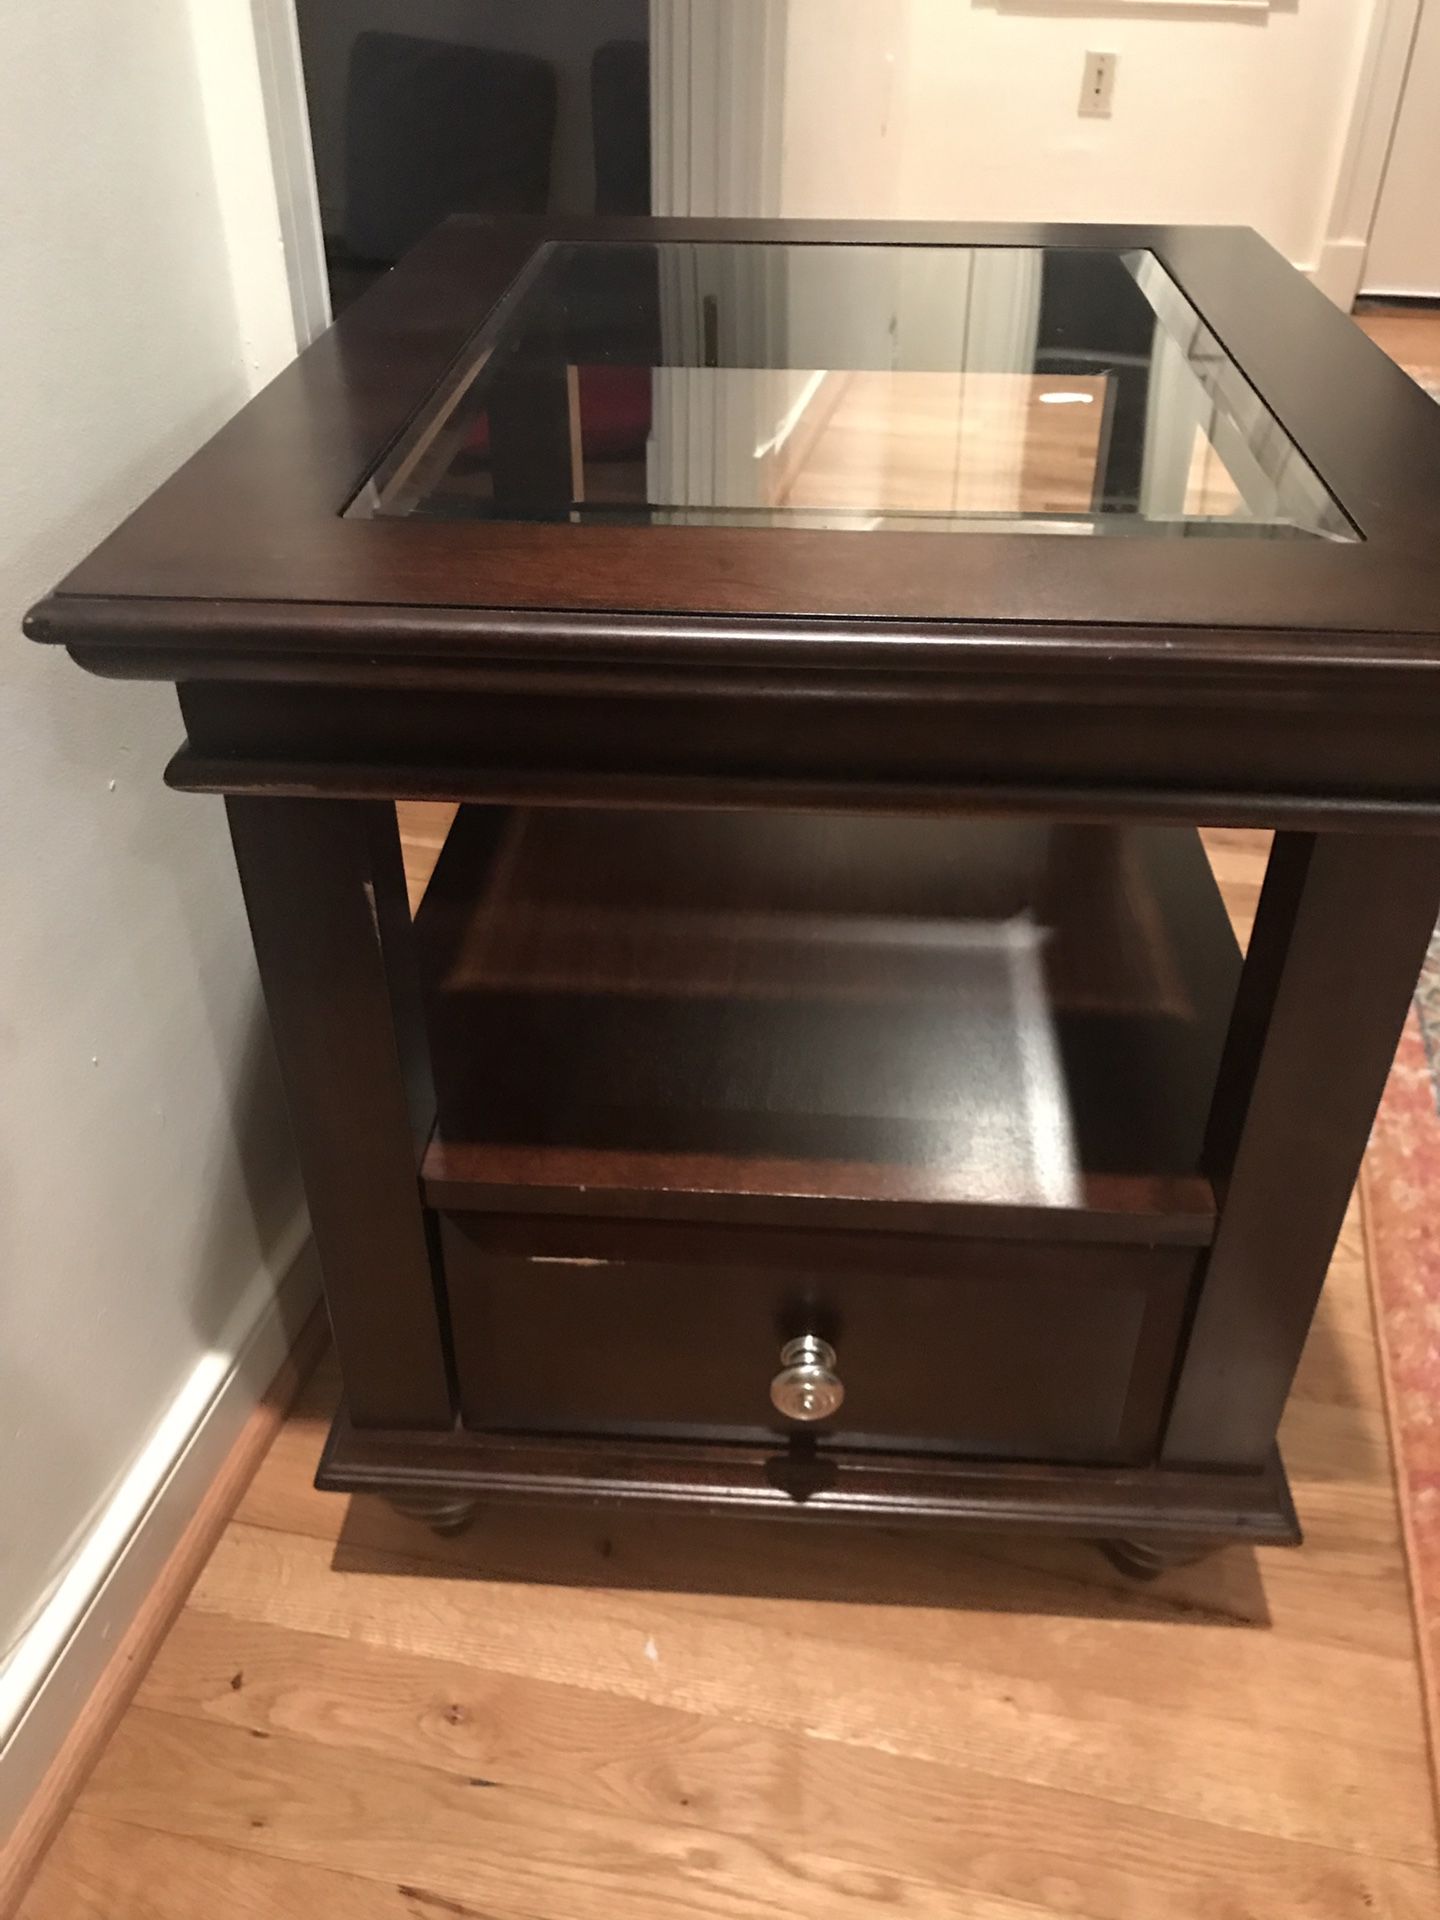 End table - espresso wood with glass top